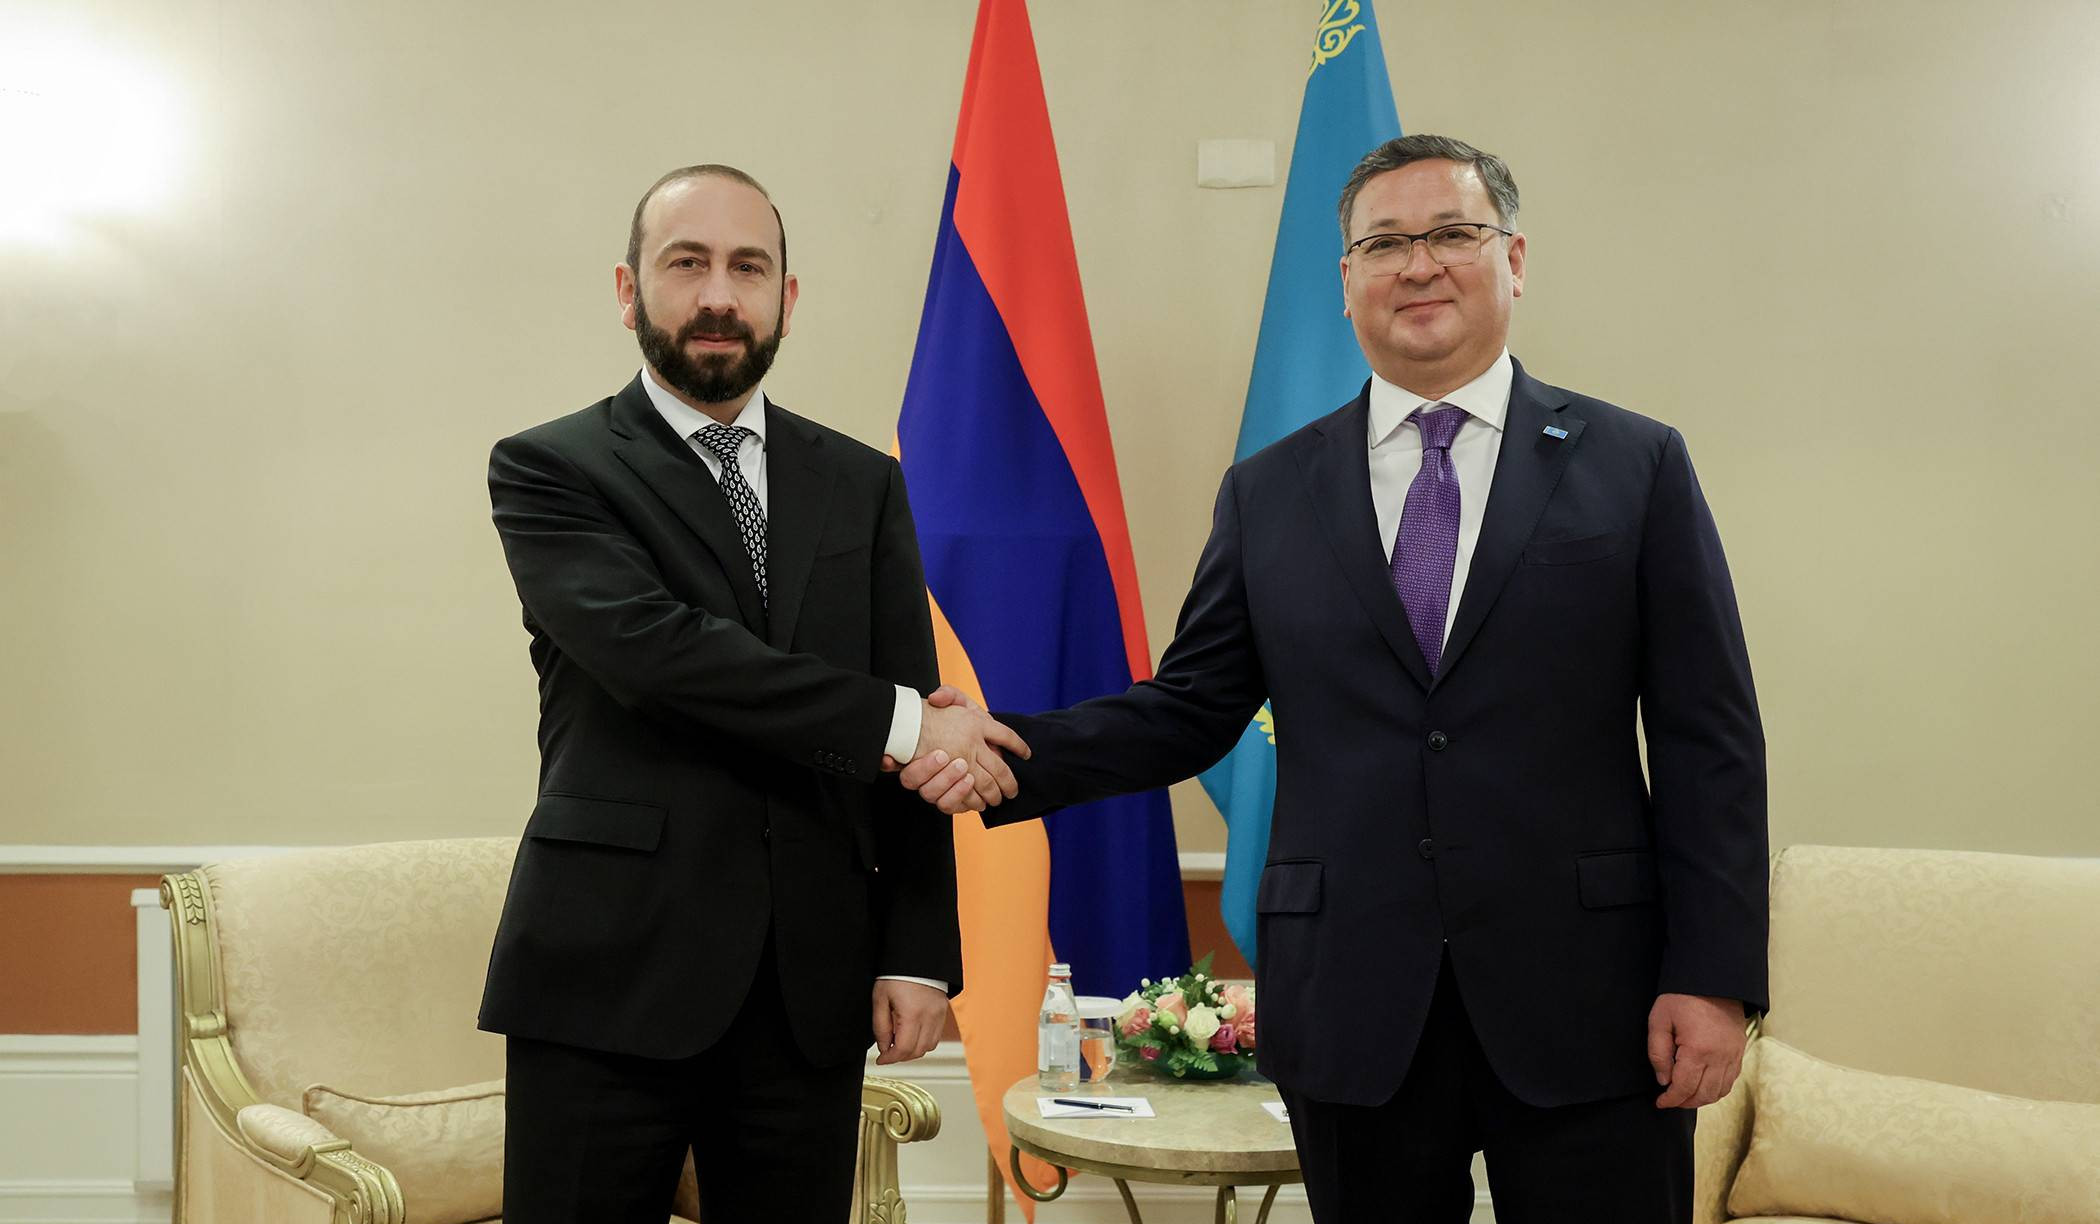 Meeting of the Ministers of Foreign Affairs of Armenia and Kazakhstan